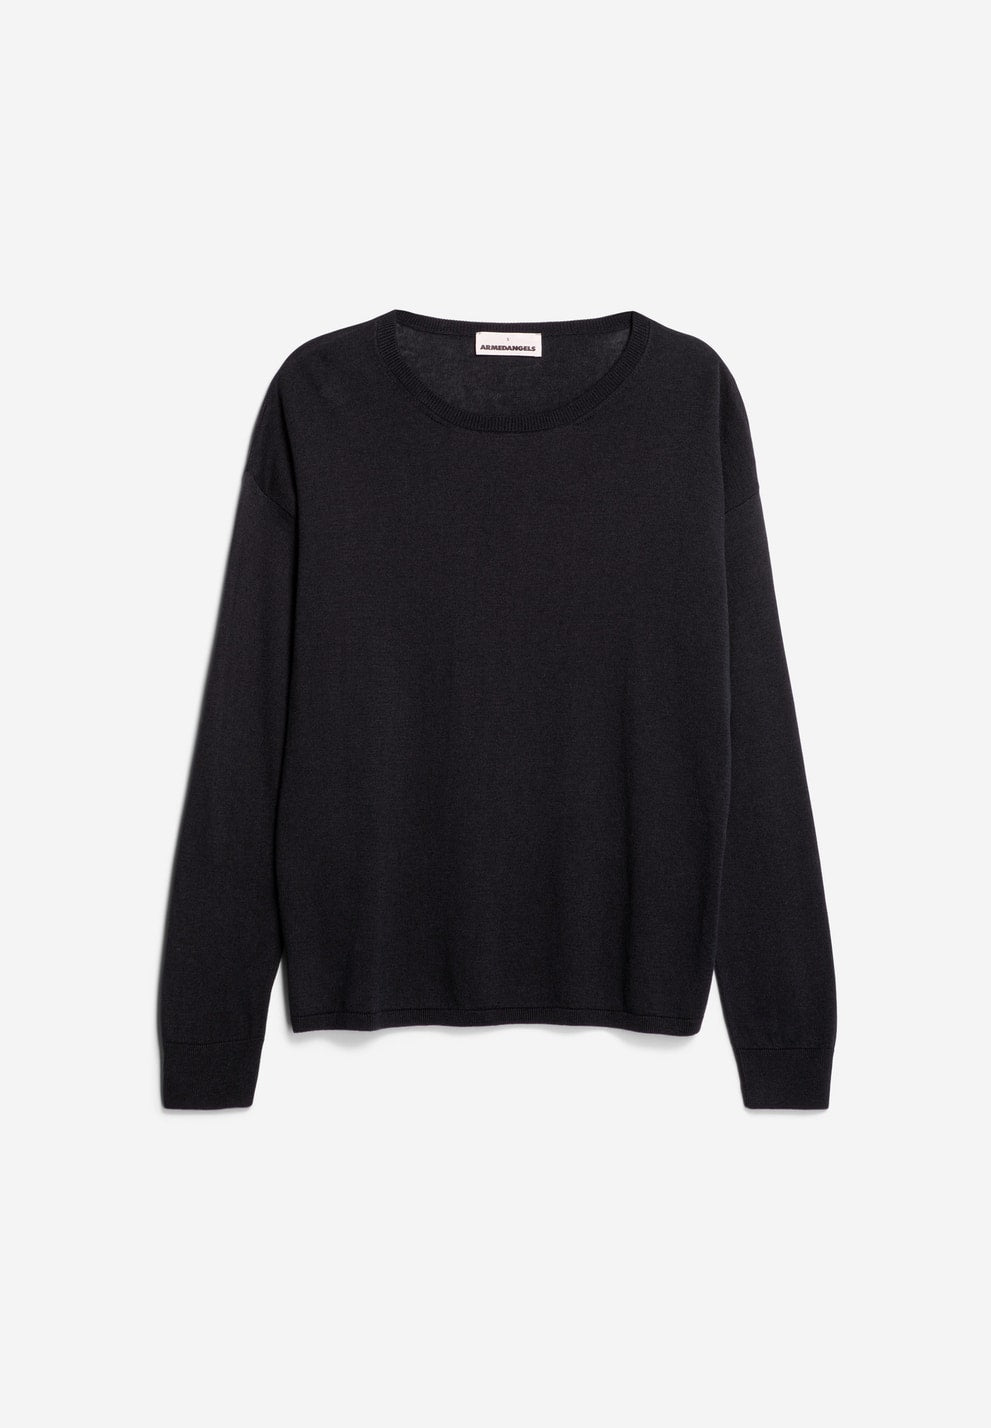 Sweater - Laarni | Relaxed Fit | Night Sky